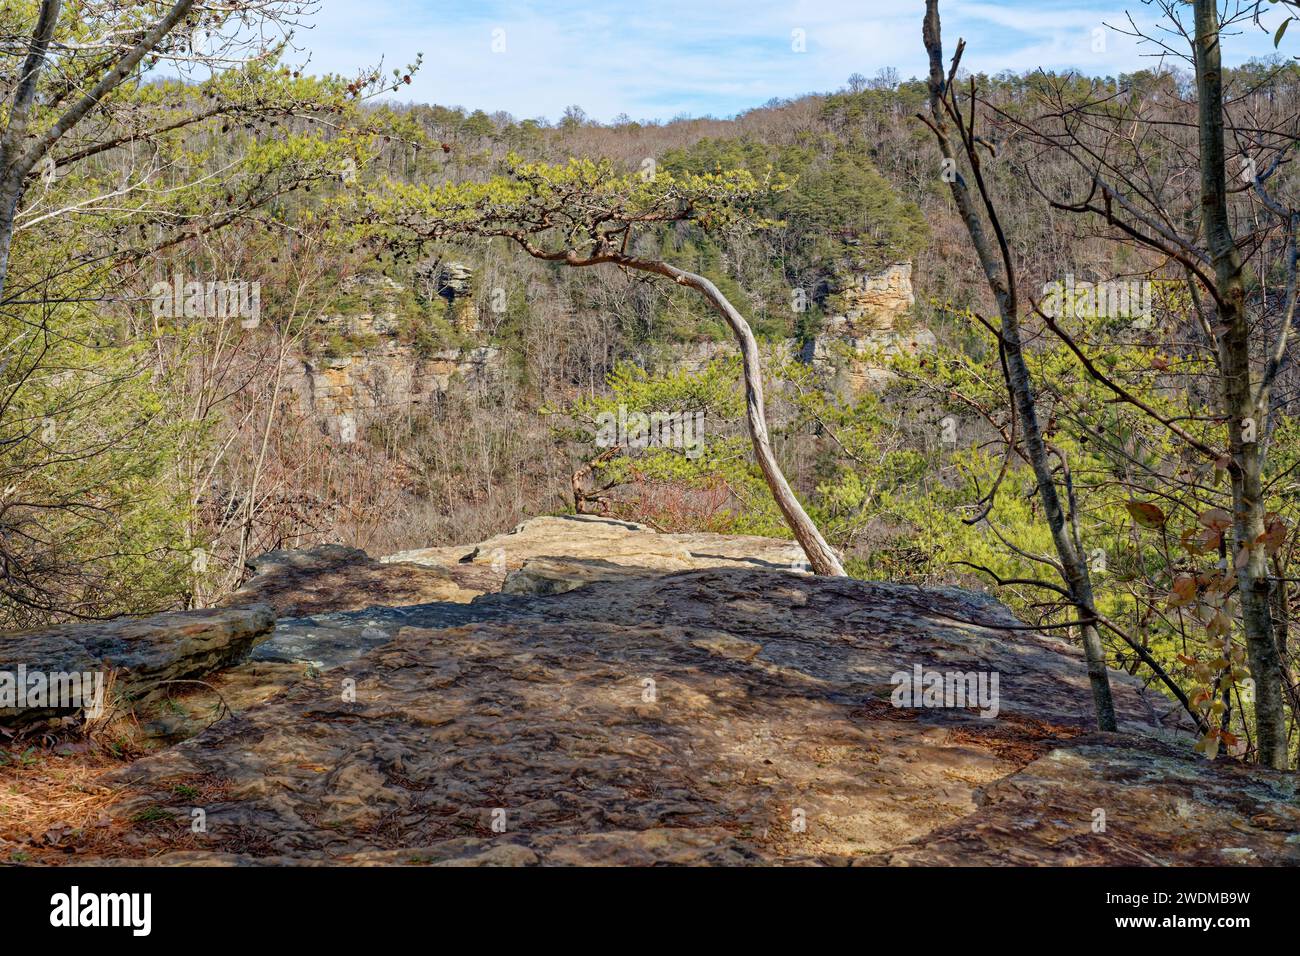 A small twisted pine tree growing at the end of the overlook cliff looking out across to the bluffs with bare trees on a sunny day in wintertime Stock Photo